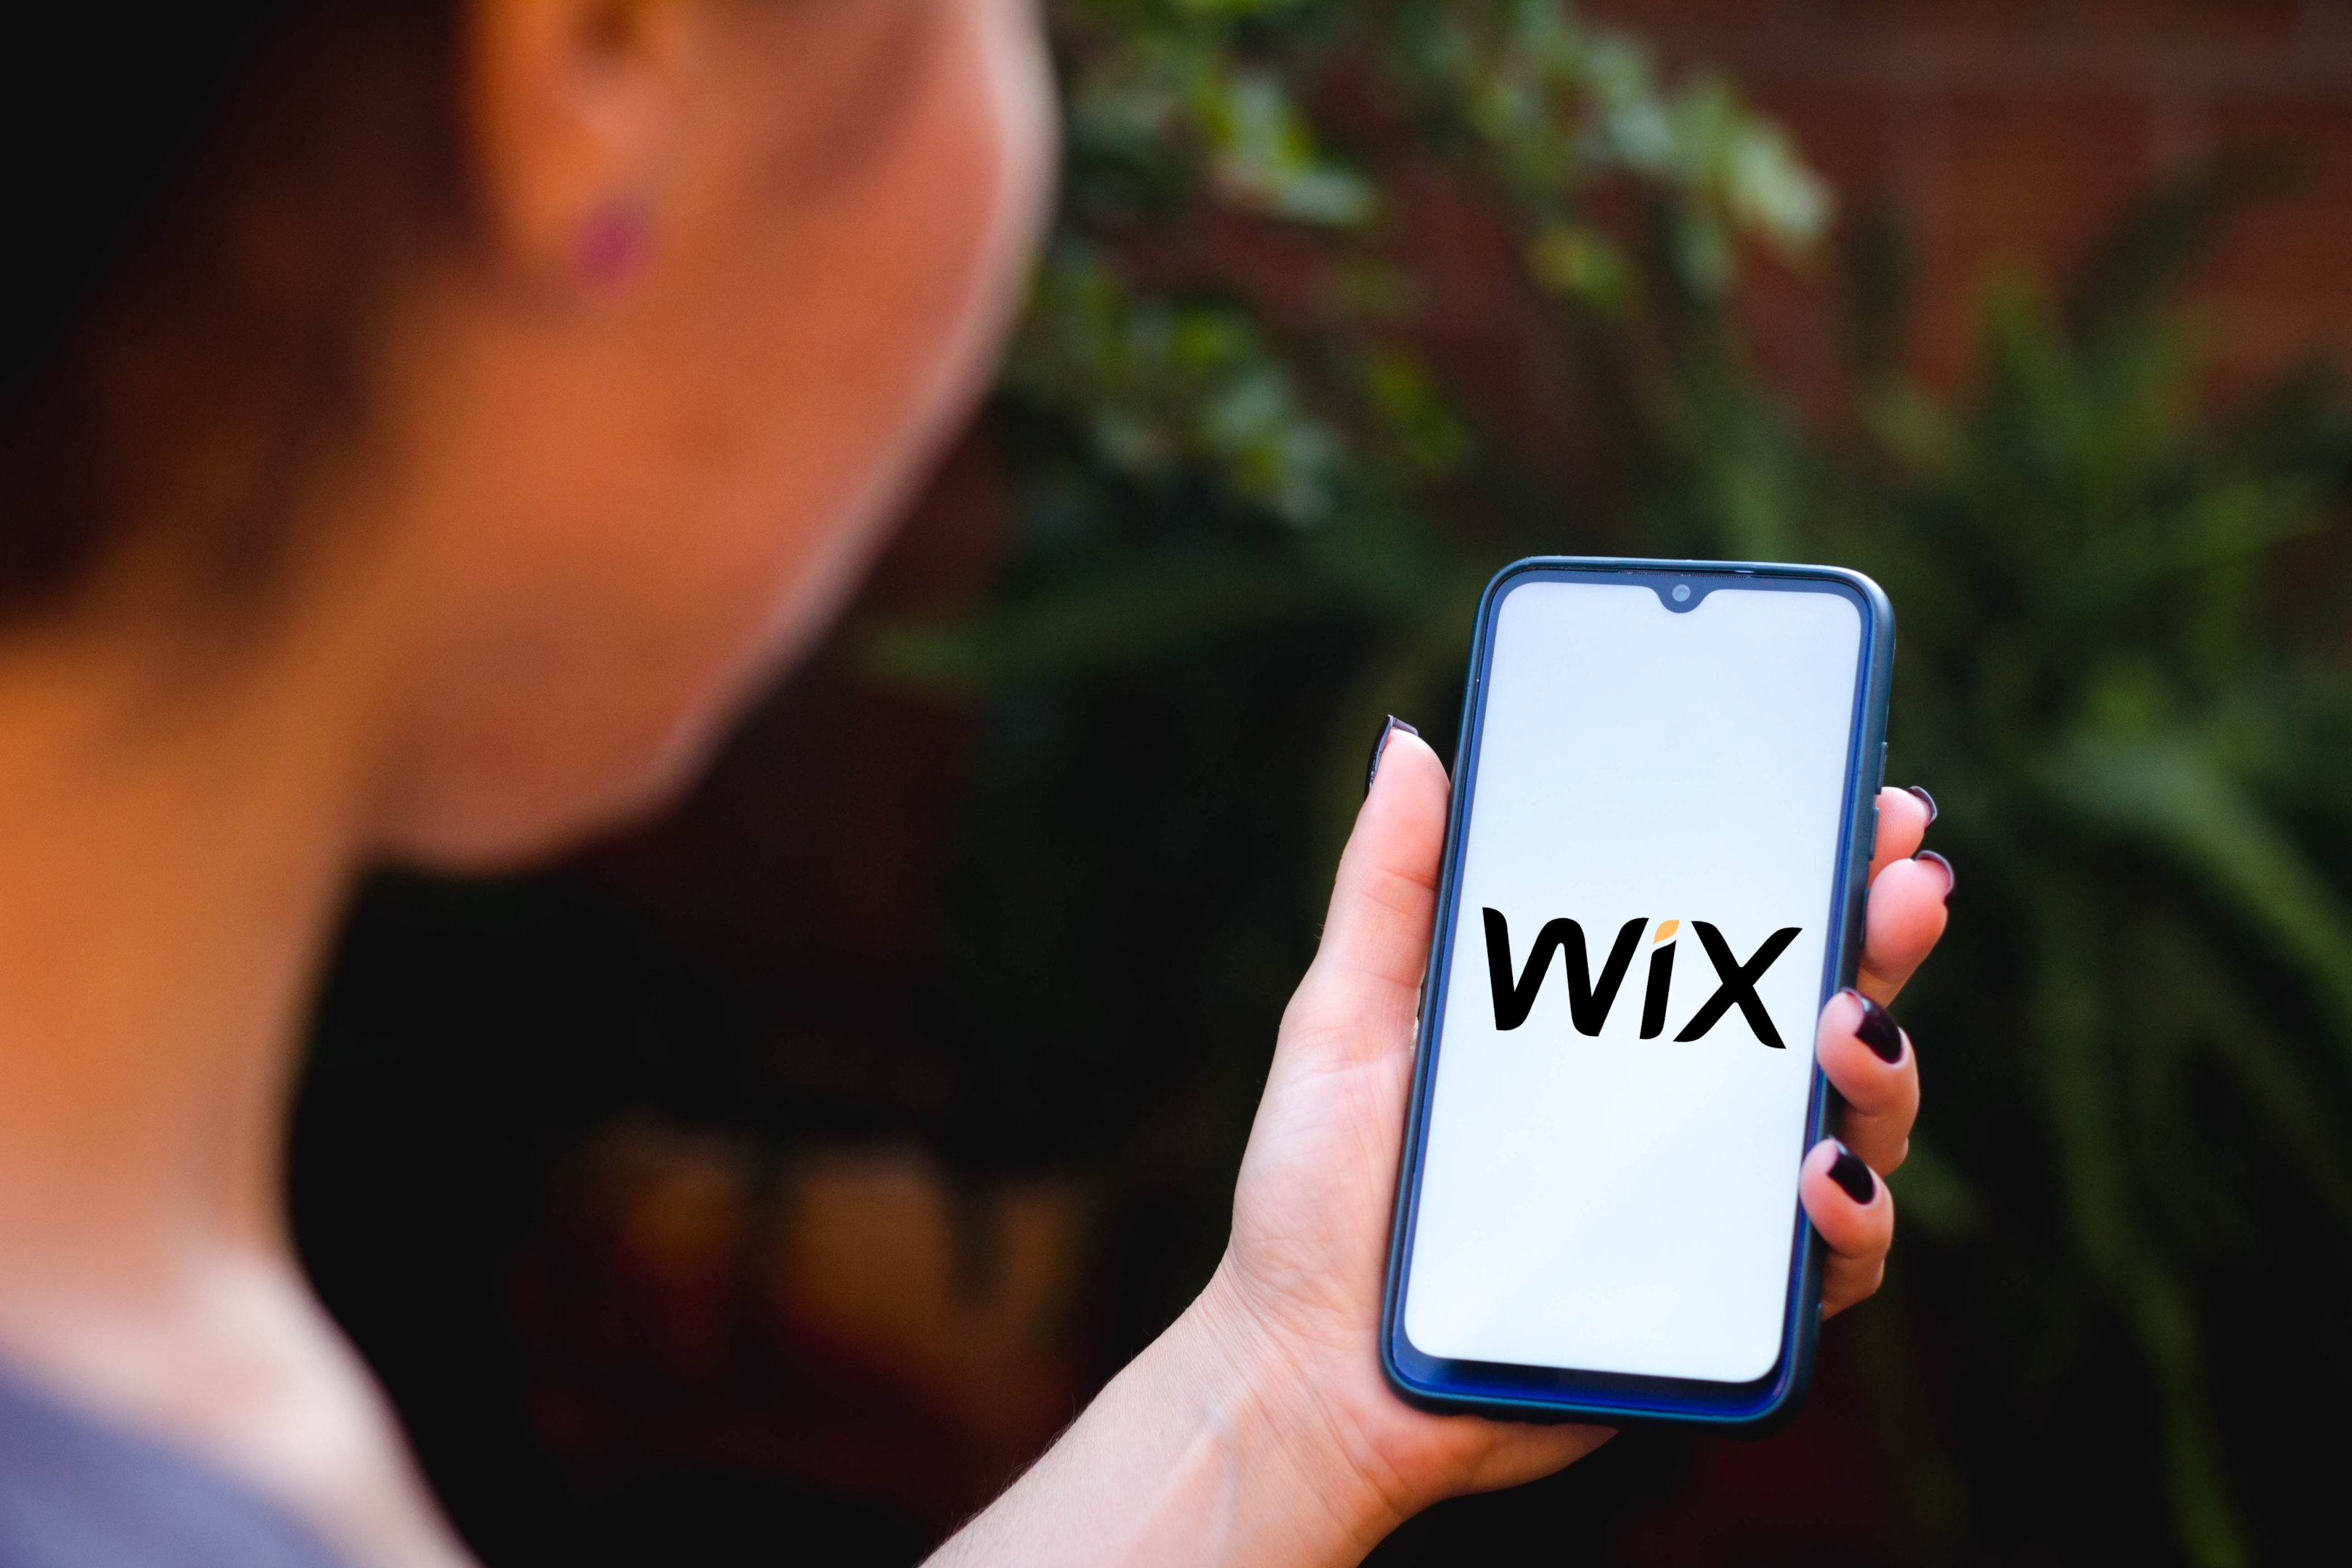 Wix Seo Expert What Are The Tasks Of A Wix Seo Expert?